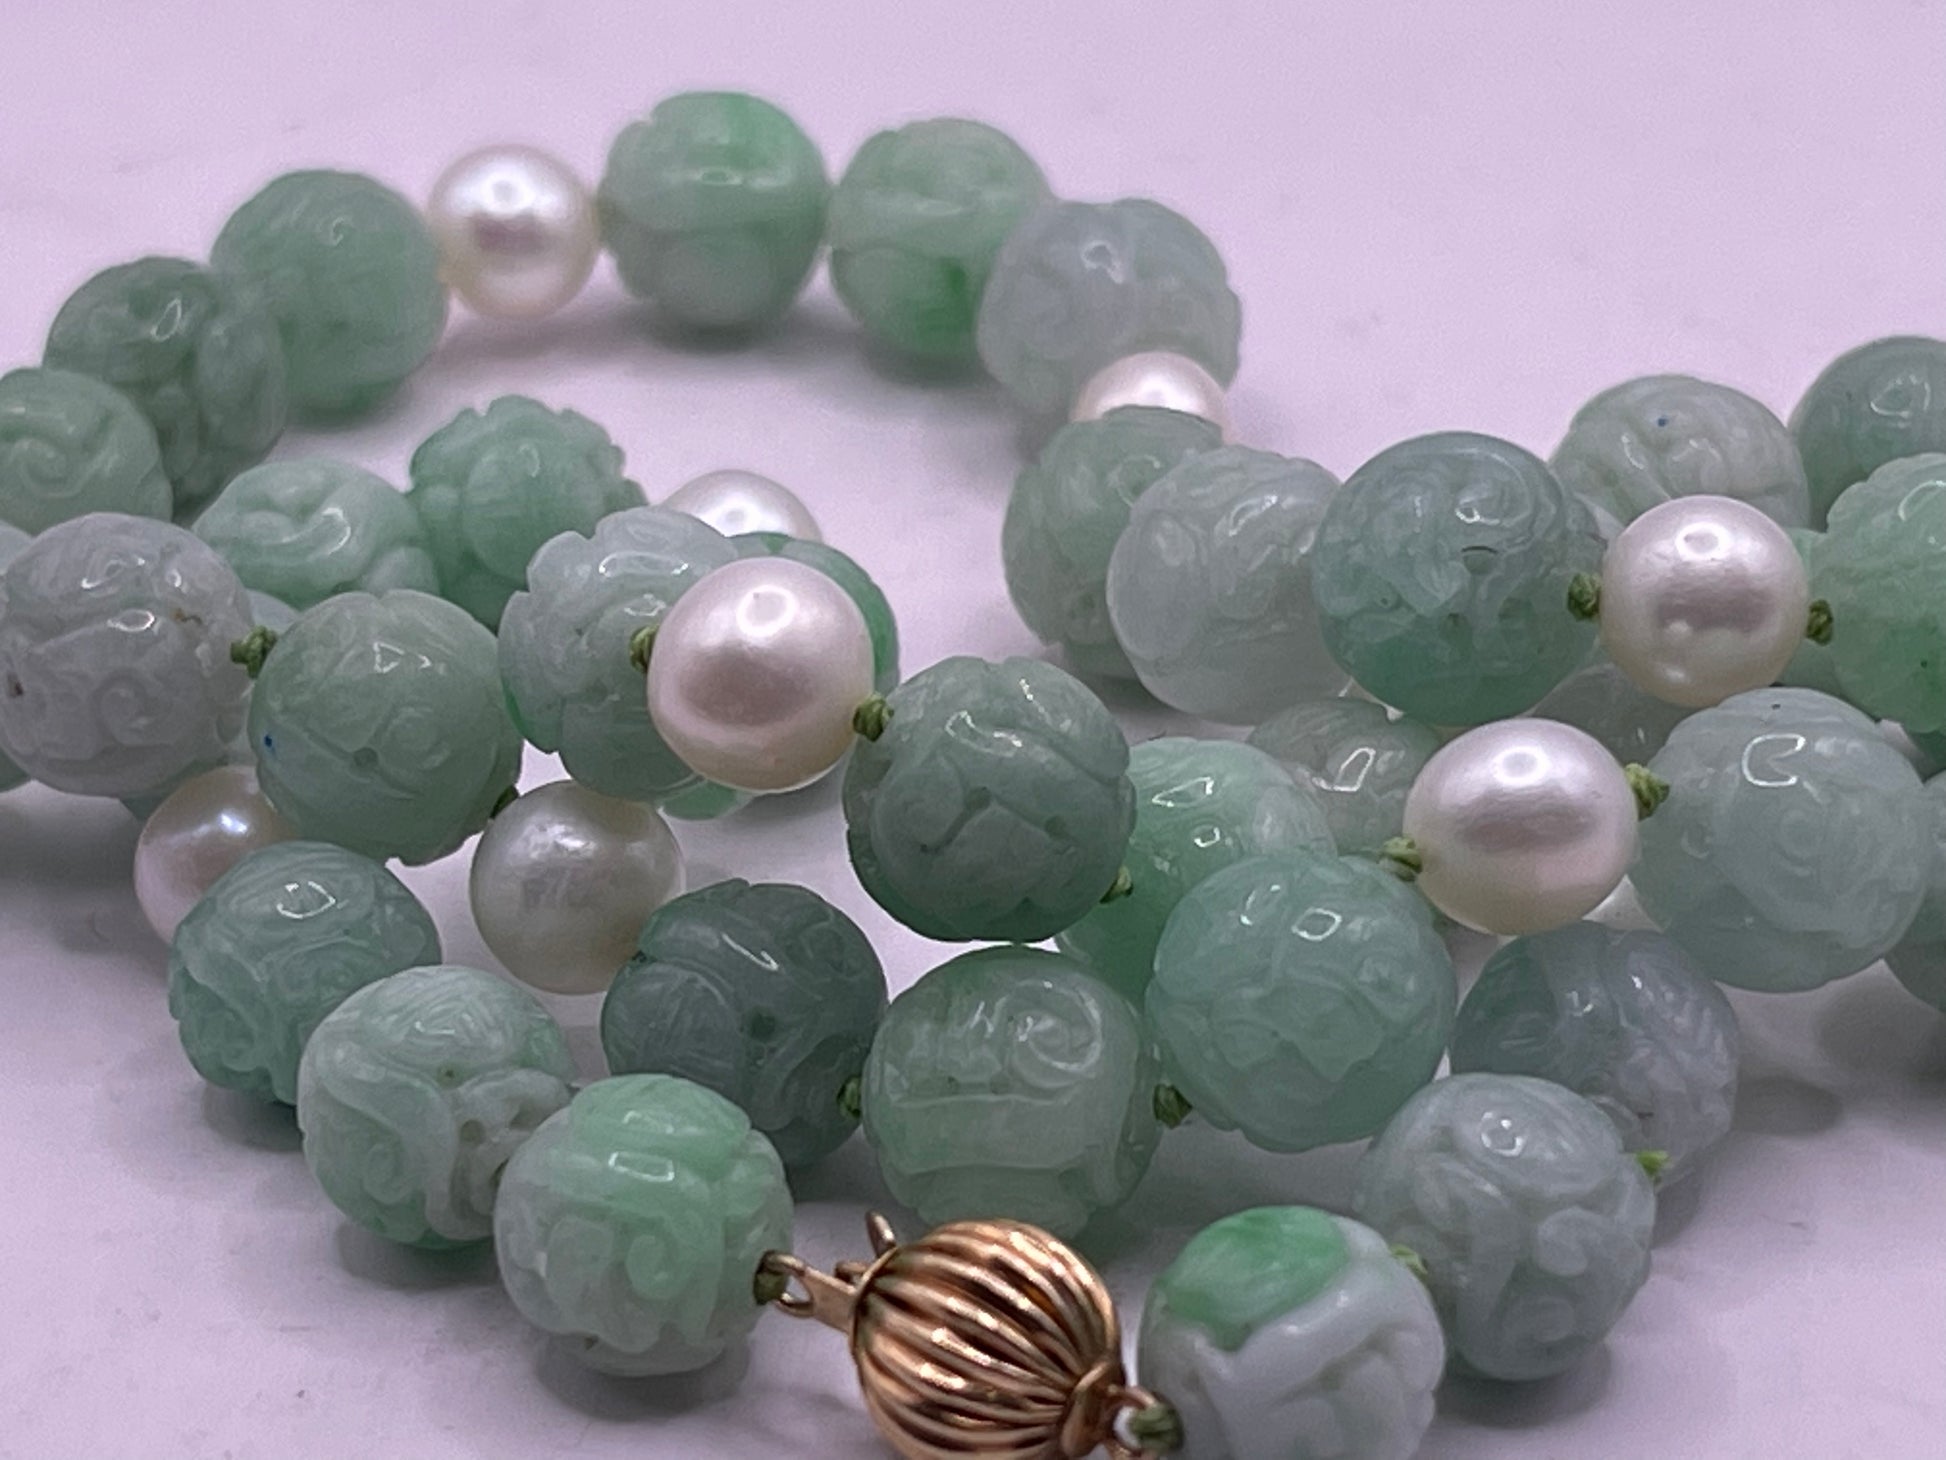 A Necklace with Vintage Carved Jade Shou Beads and Pearls